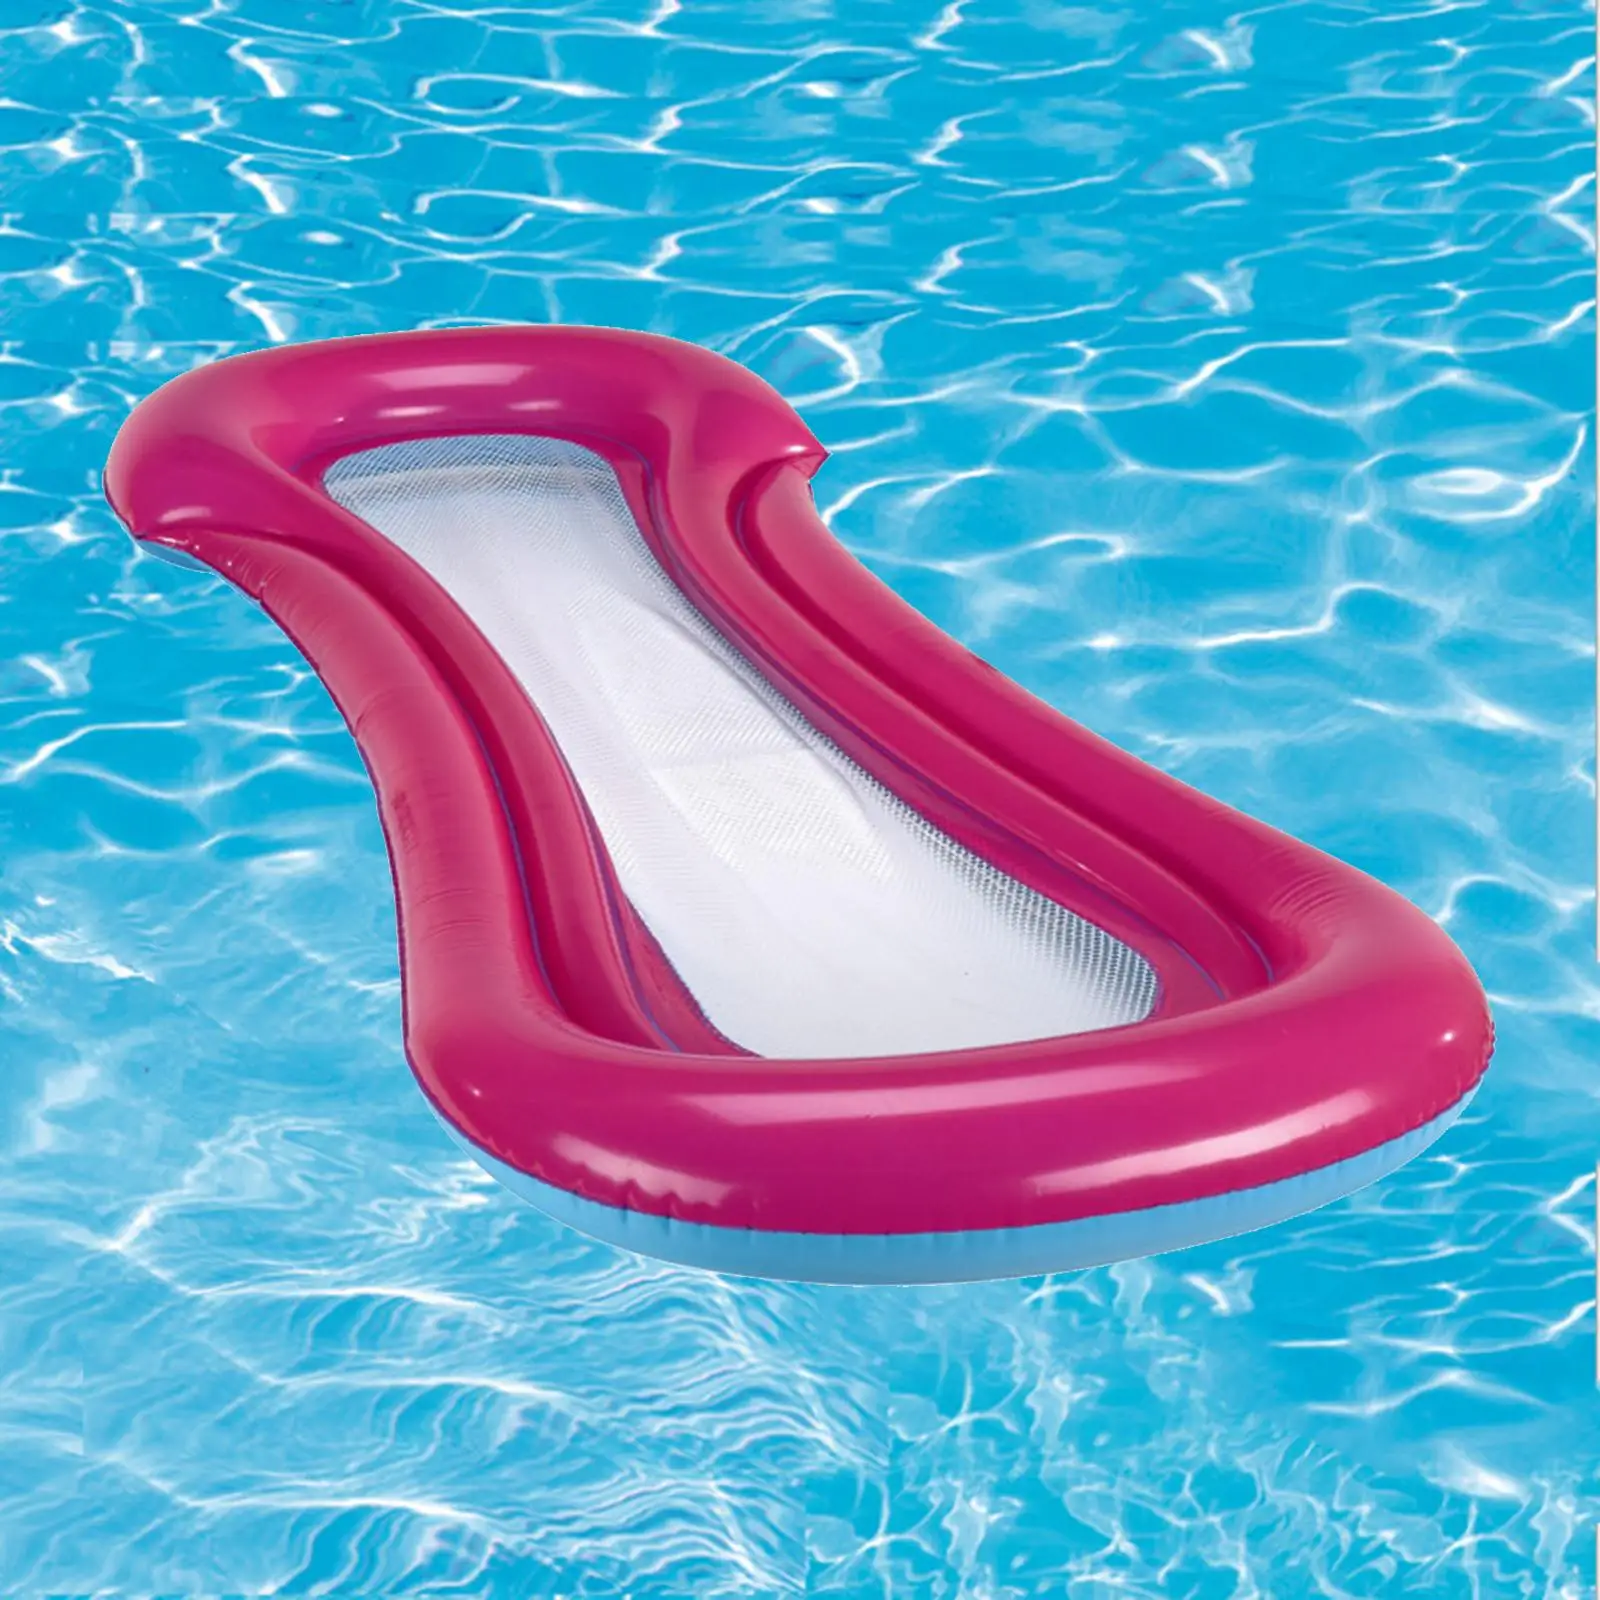 160x60cm Pool Inflatable Bed Pool Floating Mesh Lounger Float Chair